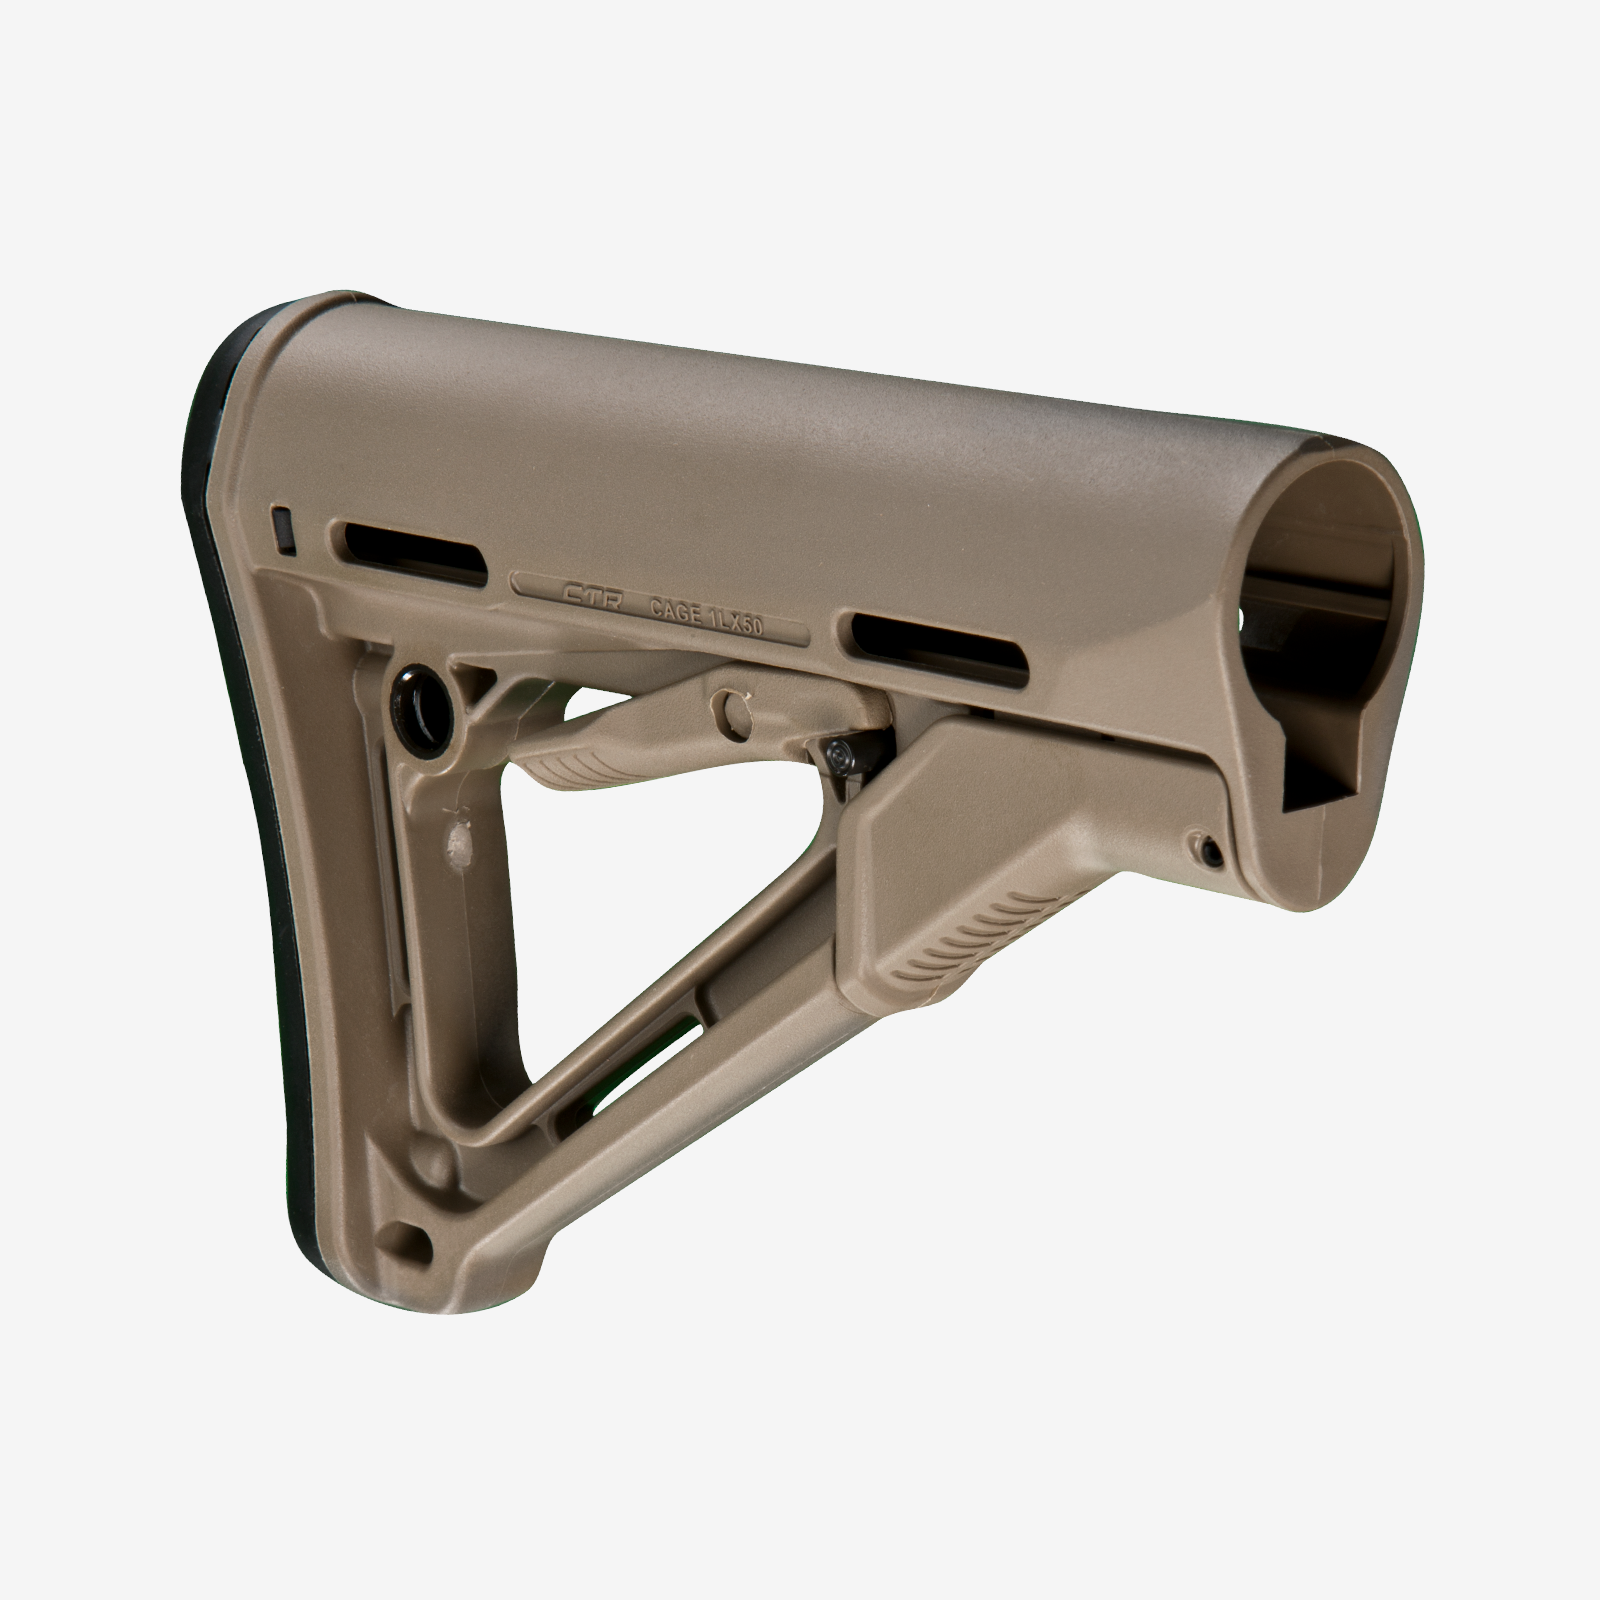 Magpul CTR Adjustable Collapsible Carbine Butt Stock (for Mil-Spec tubes) MAG310 - Australian Tactical Precision